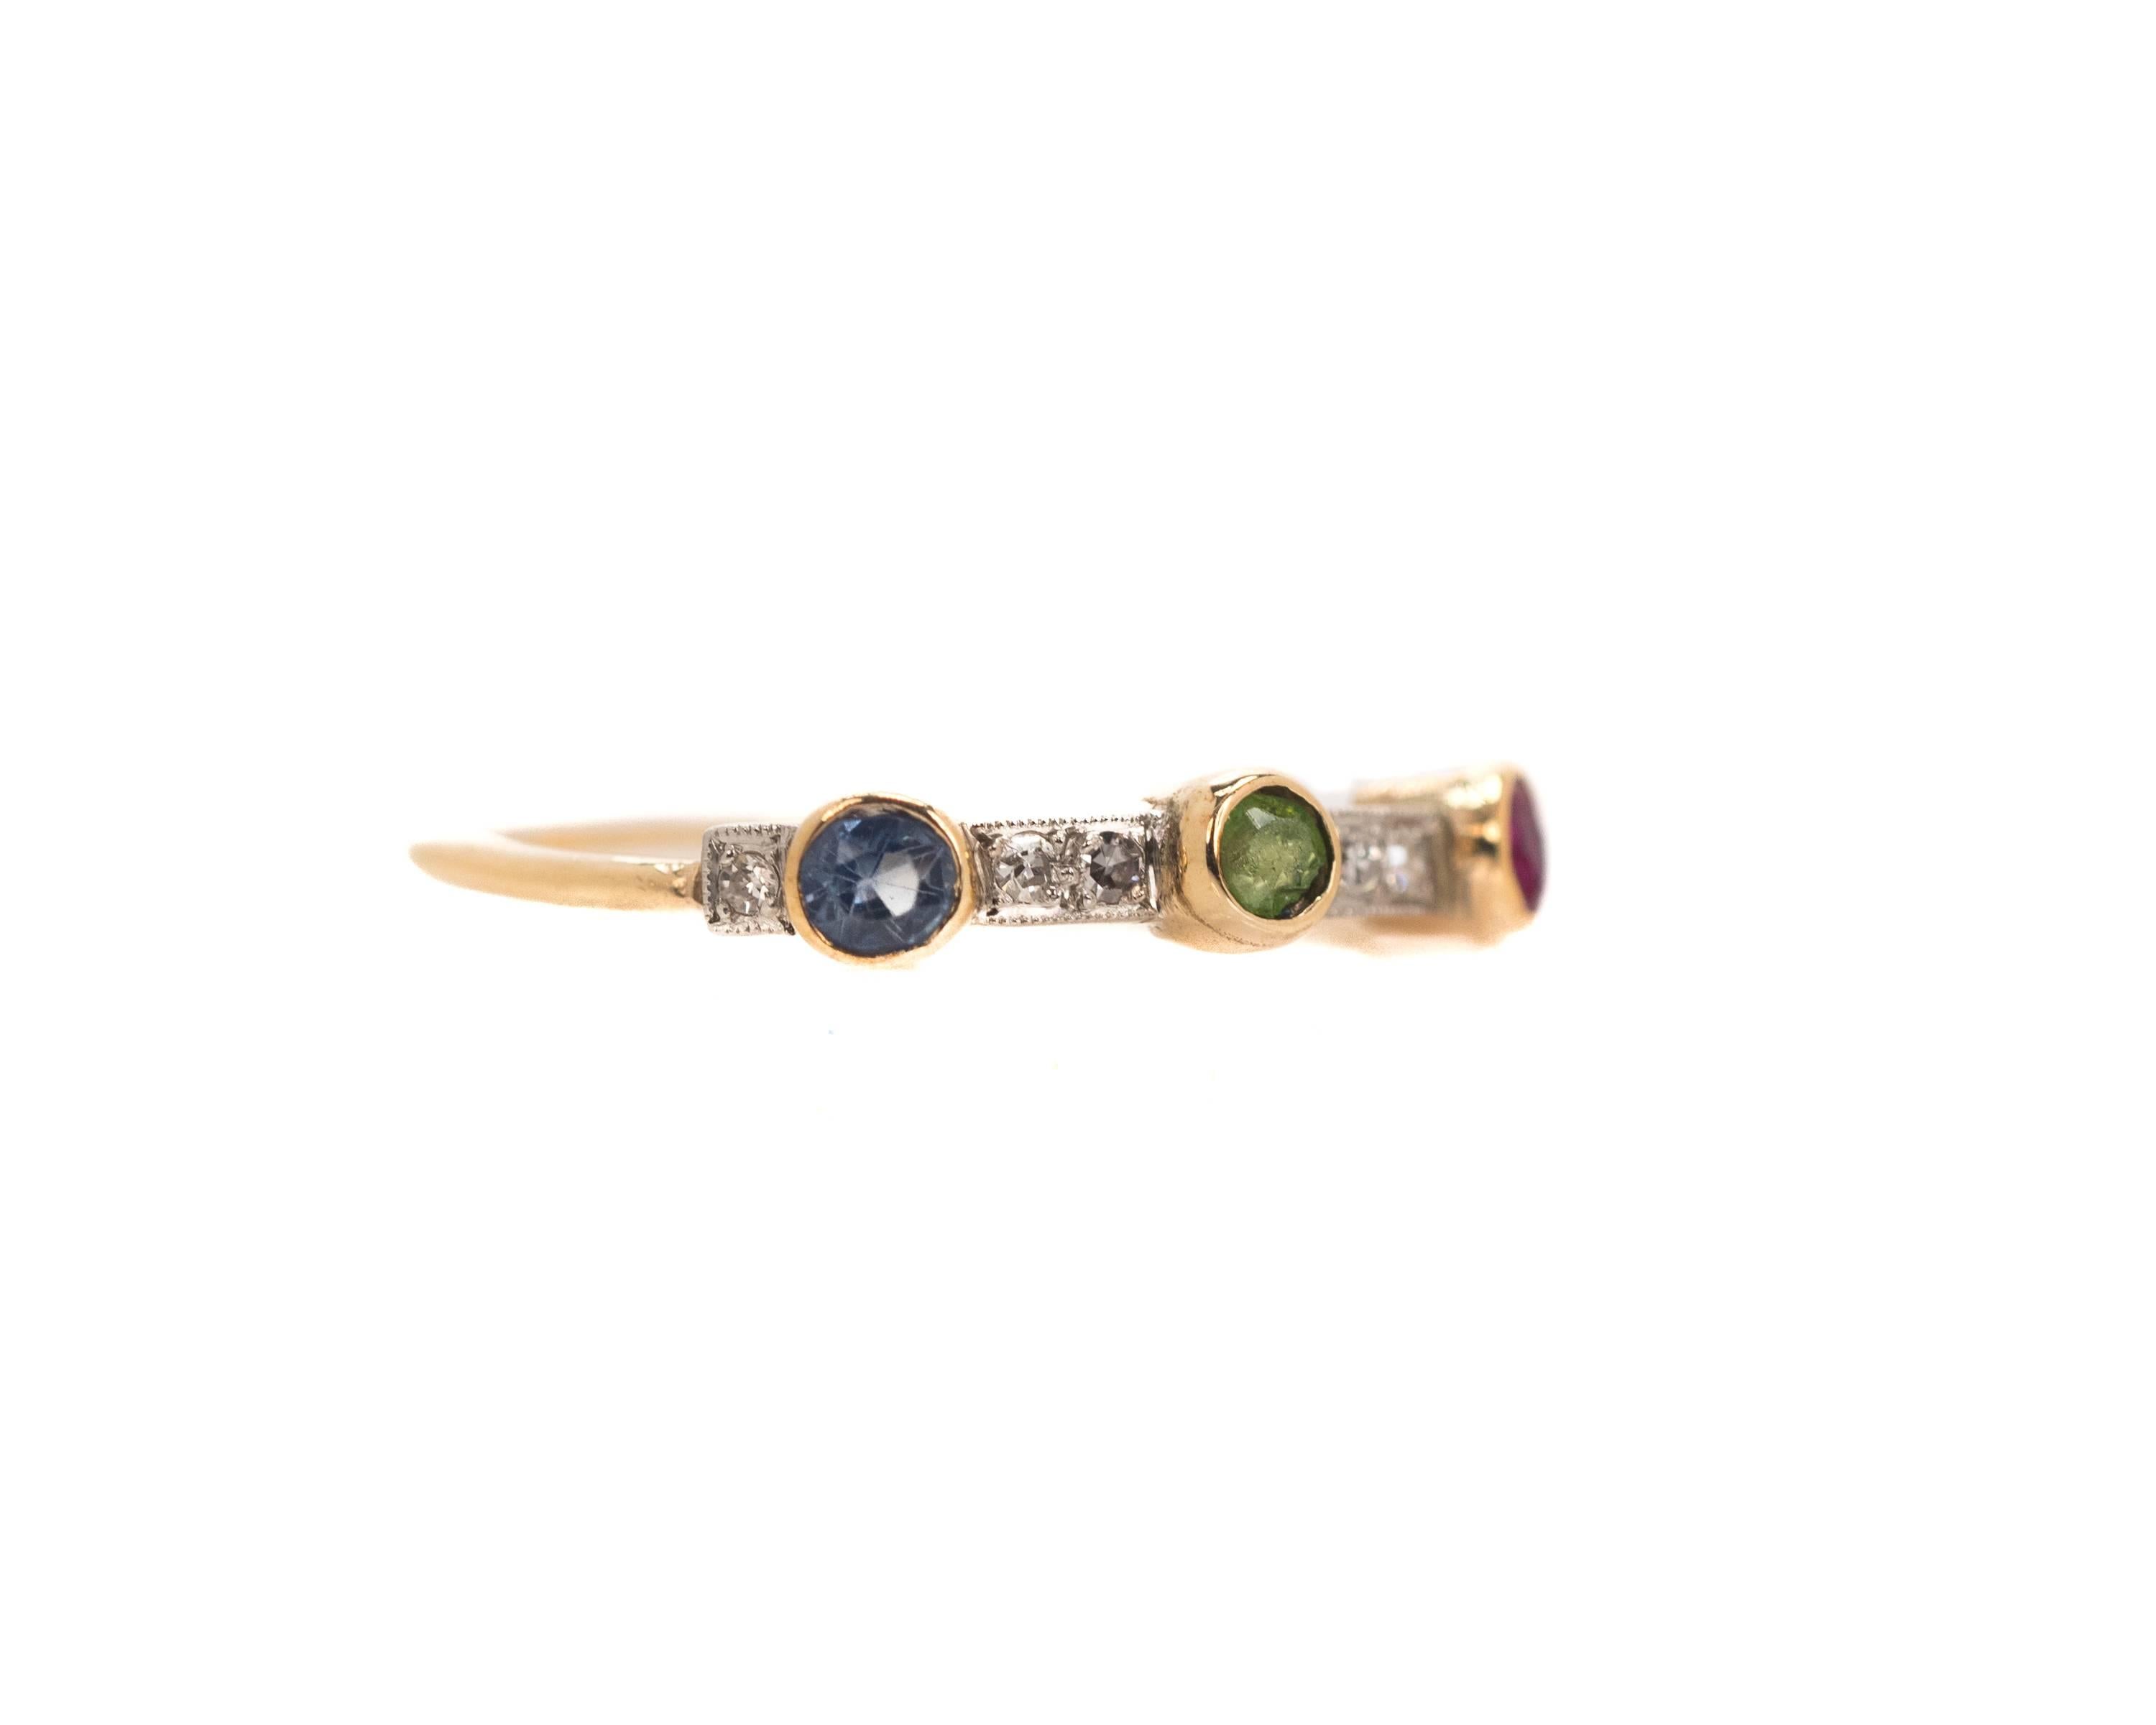 Stackable 3 Stone, 14 Karat Two-Tone Gold Colorful Gemstone Ring

This Stackable Ring features Colorful Gemstones set in 14K Yellow Gold and Diamonds set in 14K White Gold. The shank is crafted from 14K Yellow Gold. The rich yellow Gold complements